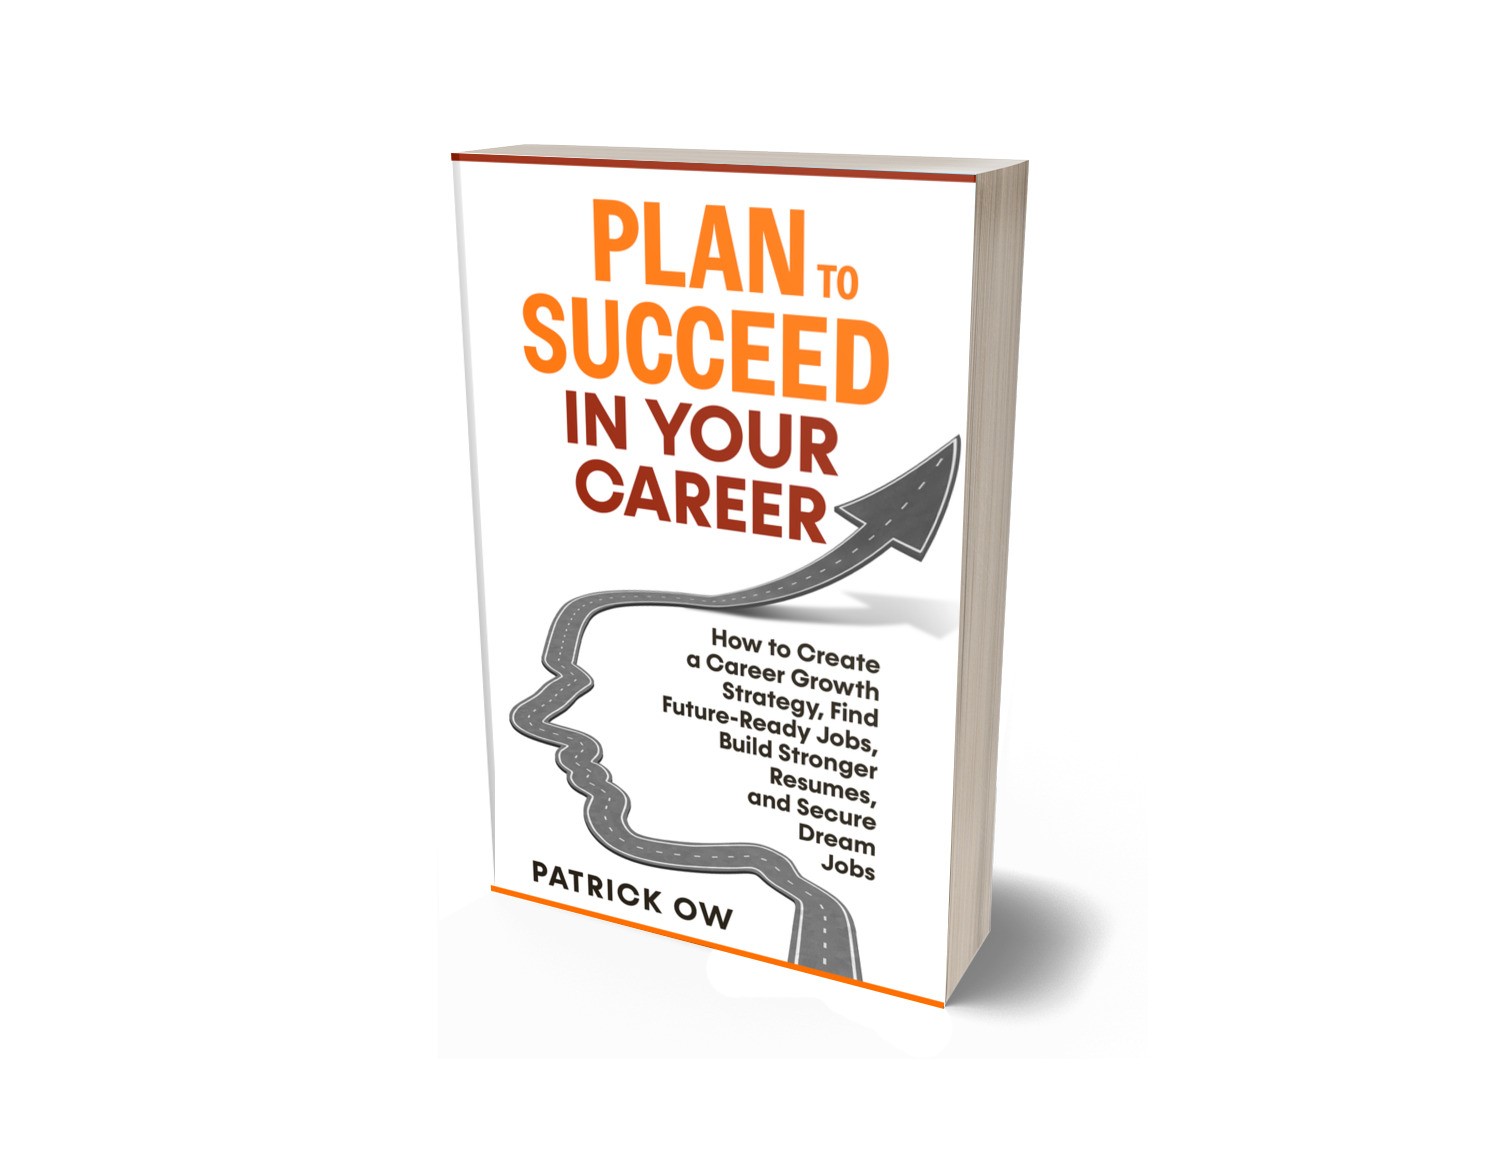 Plan to Succeed in Your Career - Practical Risk Training